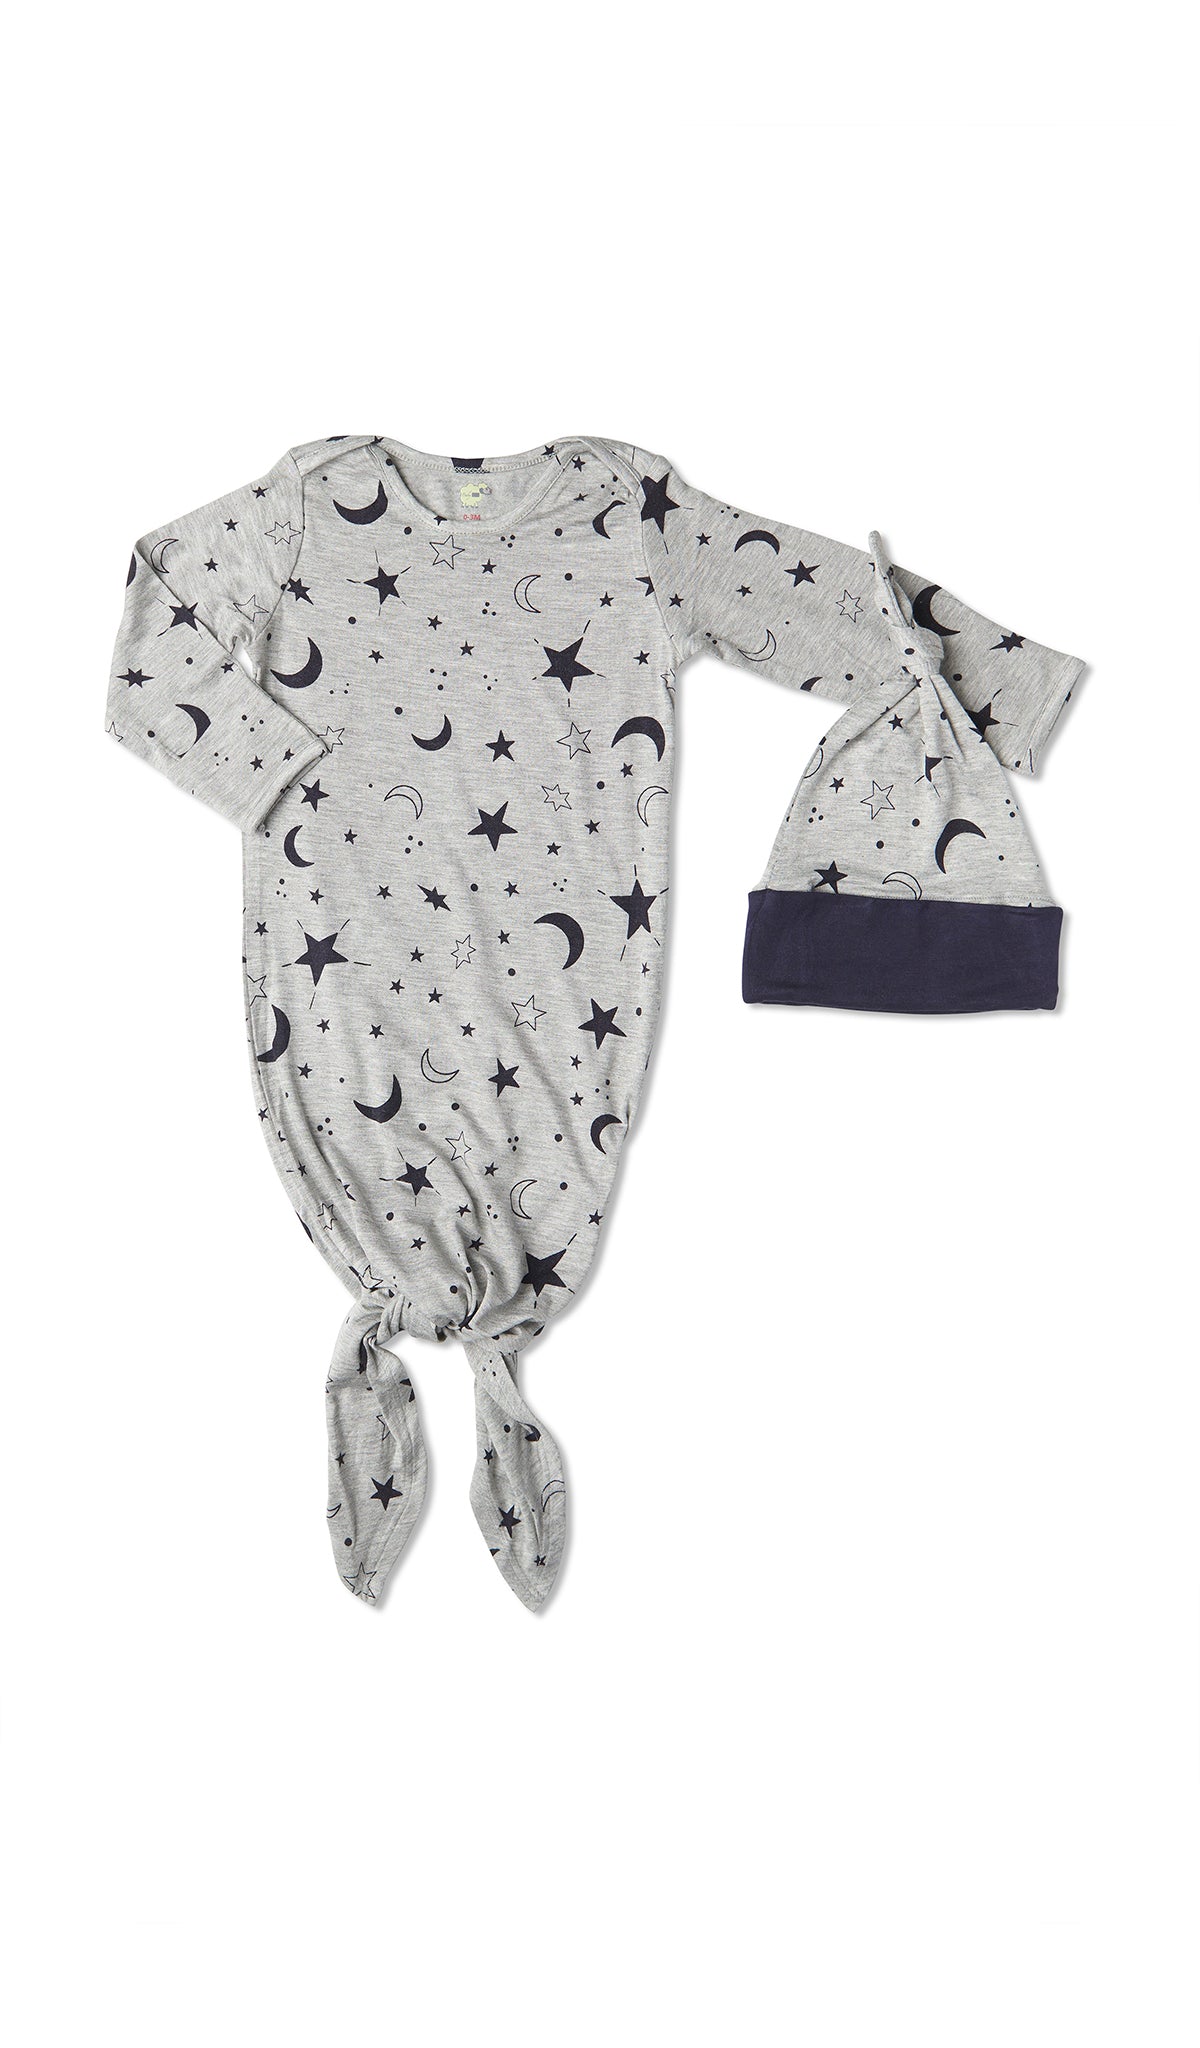 Twinkle Night Knotted Gown 2-Piece flat shot showing long sleeve baby gown with hem tied into a tie-knot bow and matching knotted hat.